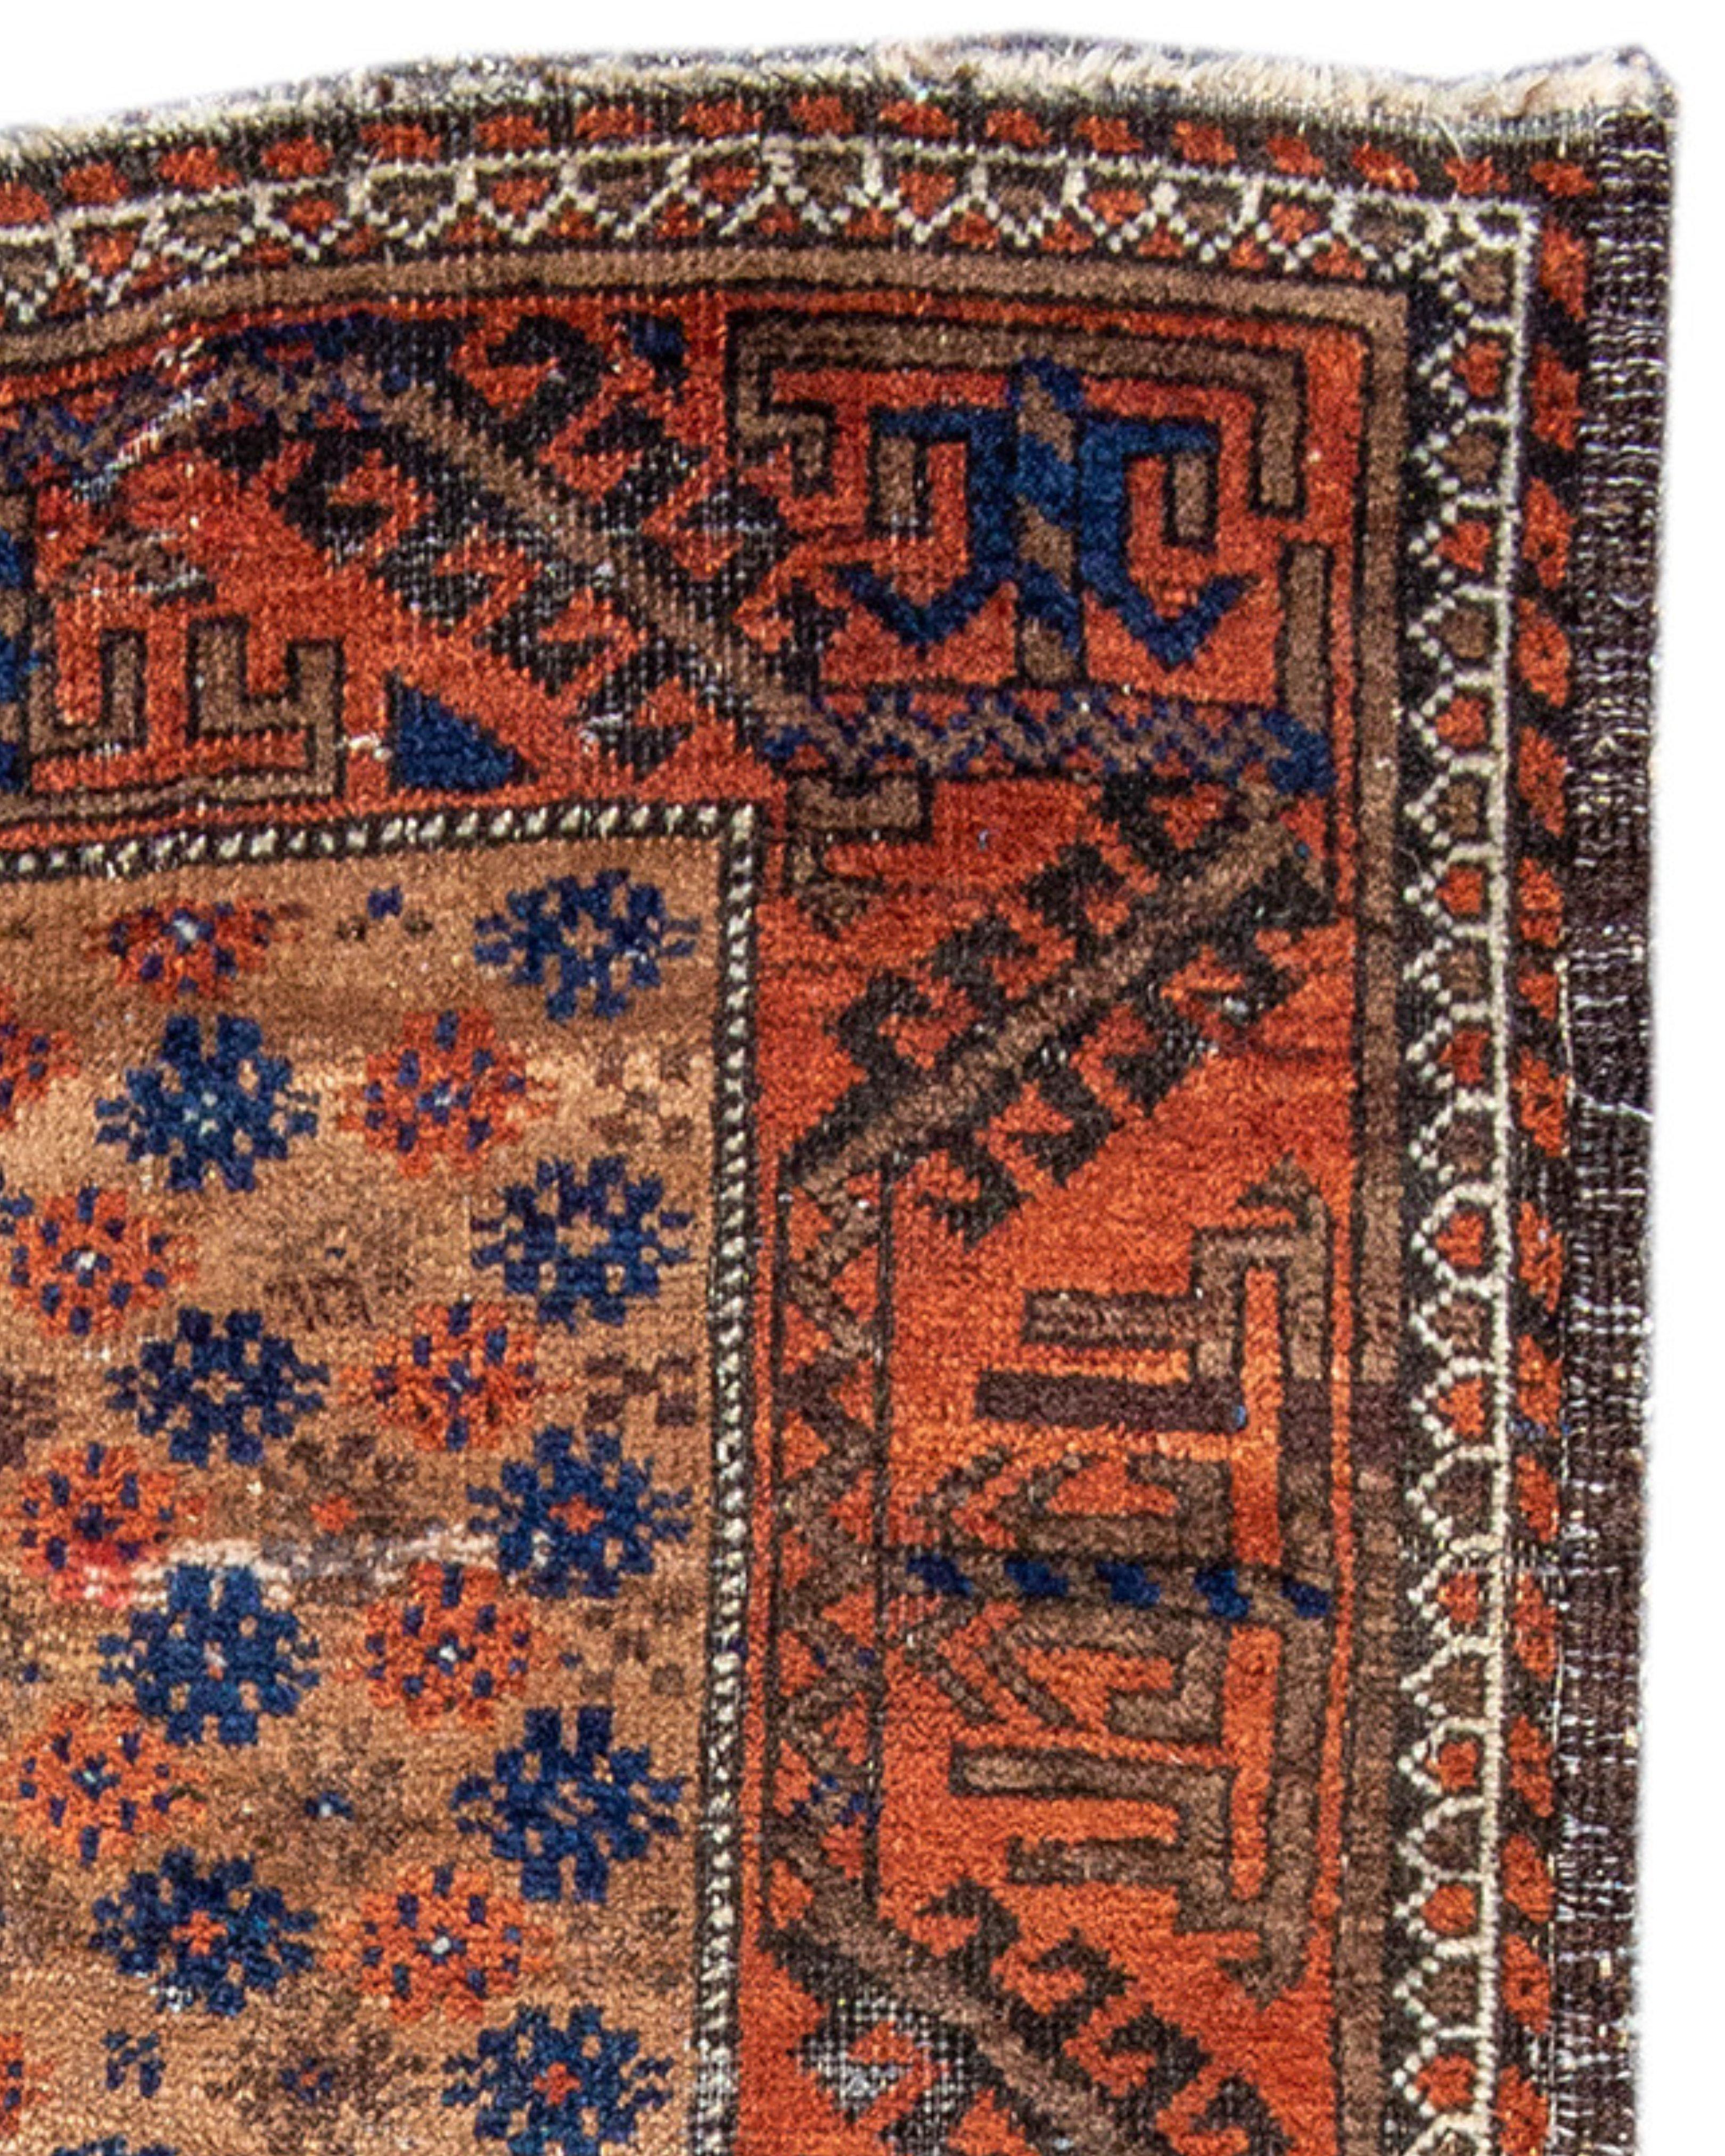 Baluch rug, Late 19th Century

Additional Information:
Dimensions: 2'9